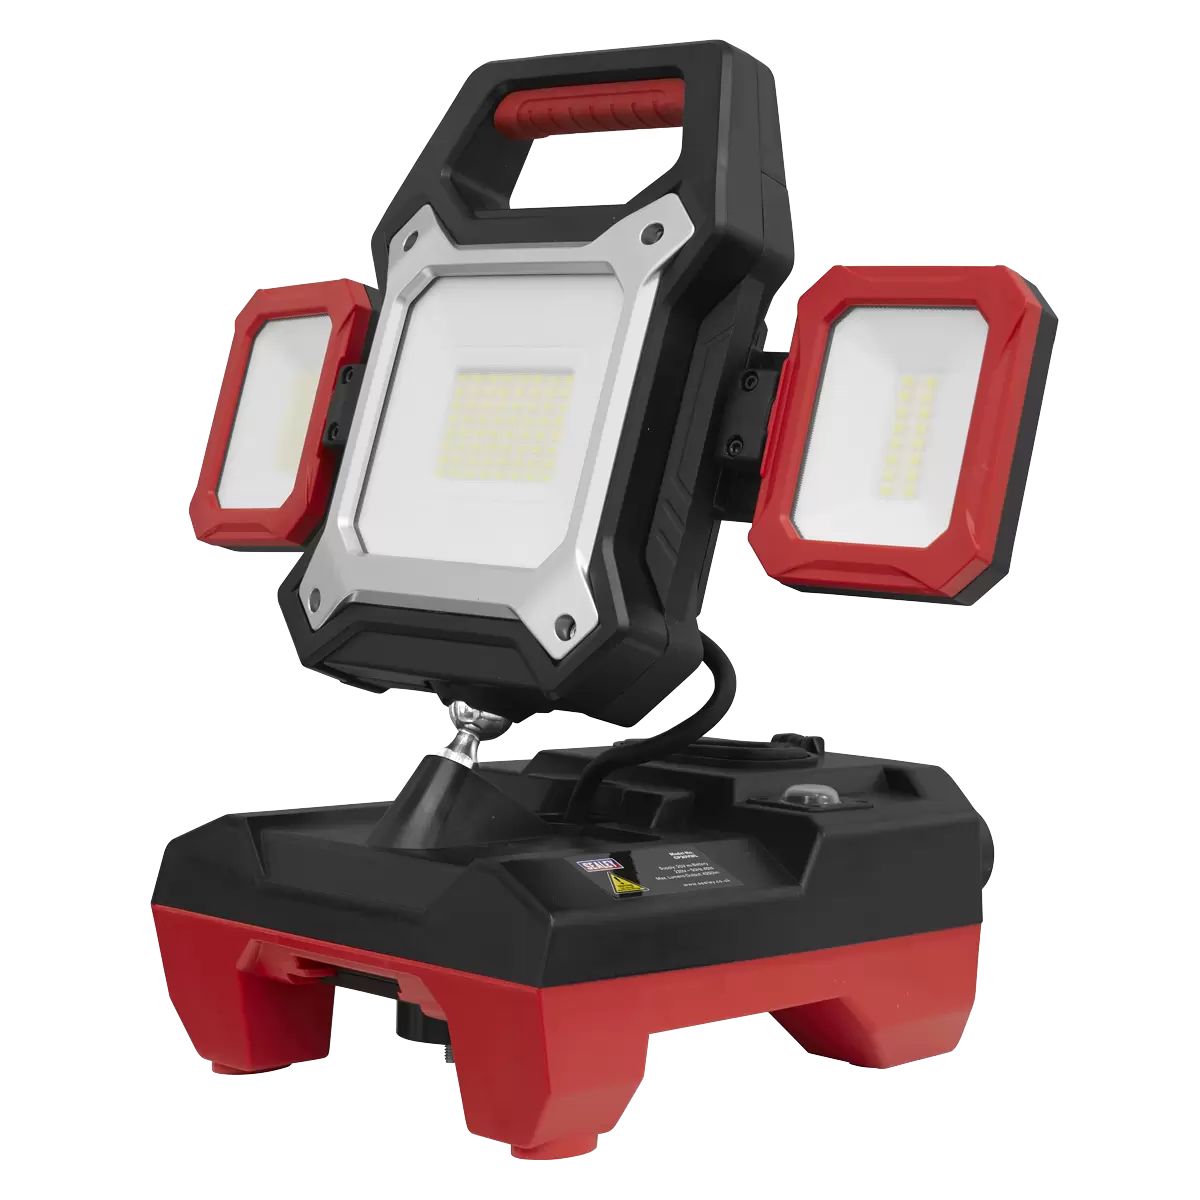 Sealey CP20VWLKIT1 Cordless/Corded 2-in-1 Work Light Kit With Battery & Charger